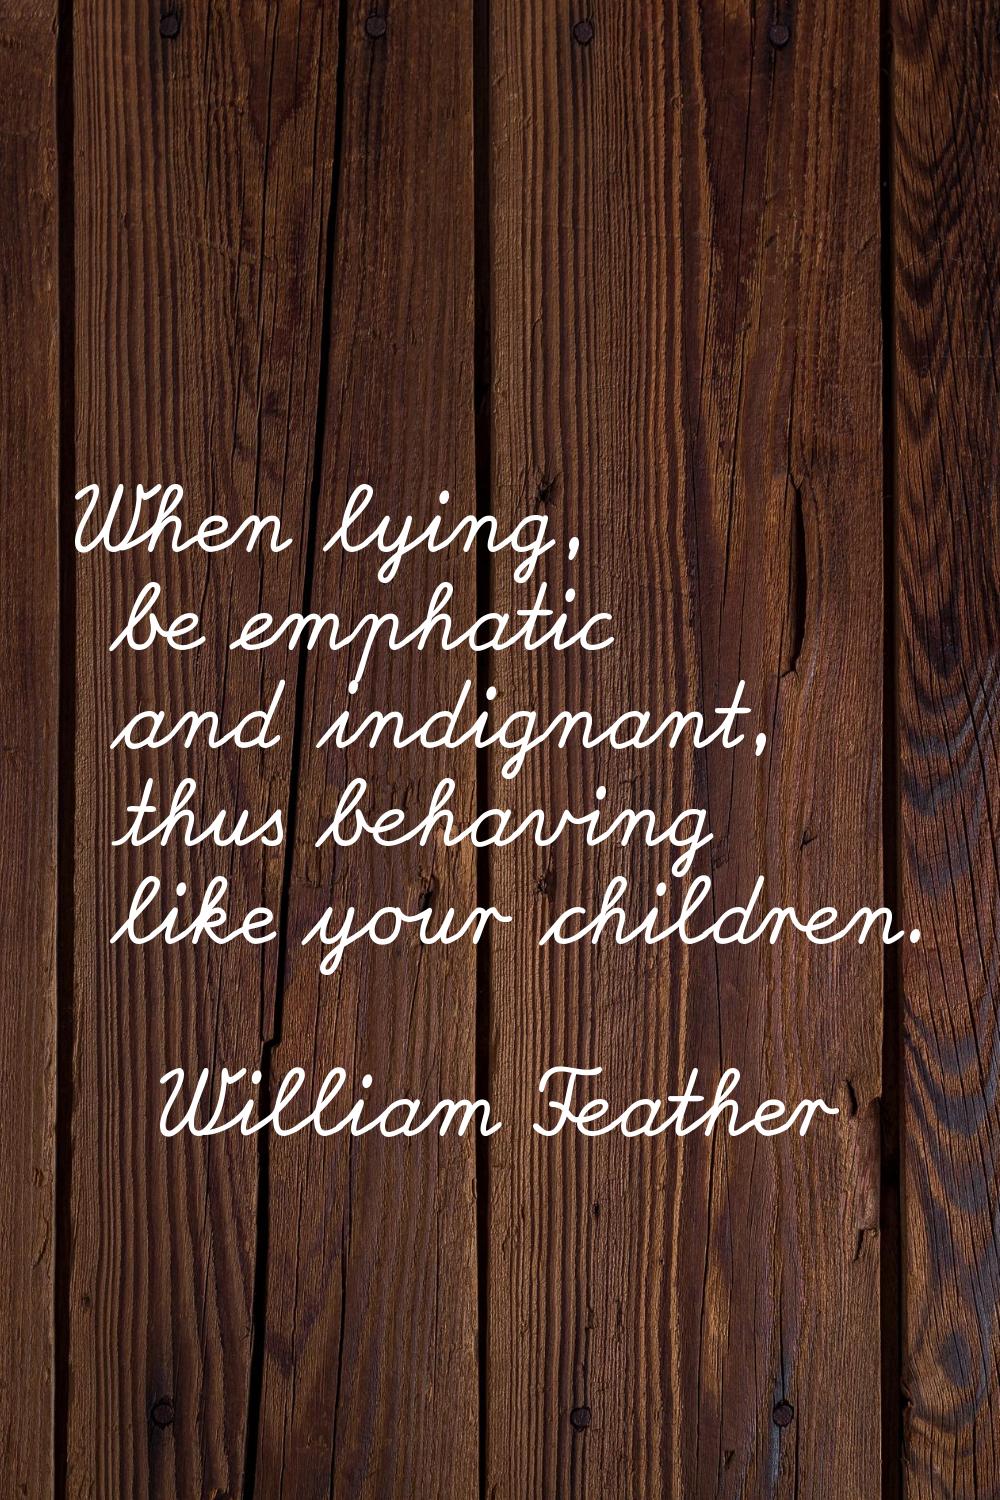 When lying, be emphatic and indignant, thus behaving like your children.